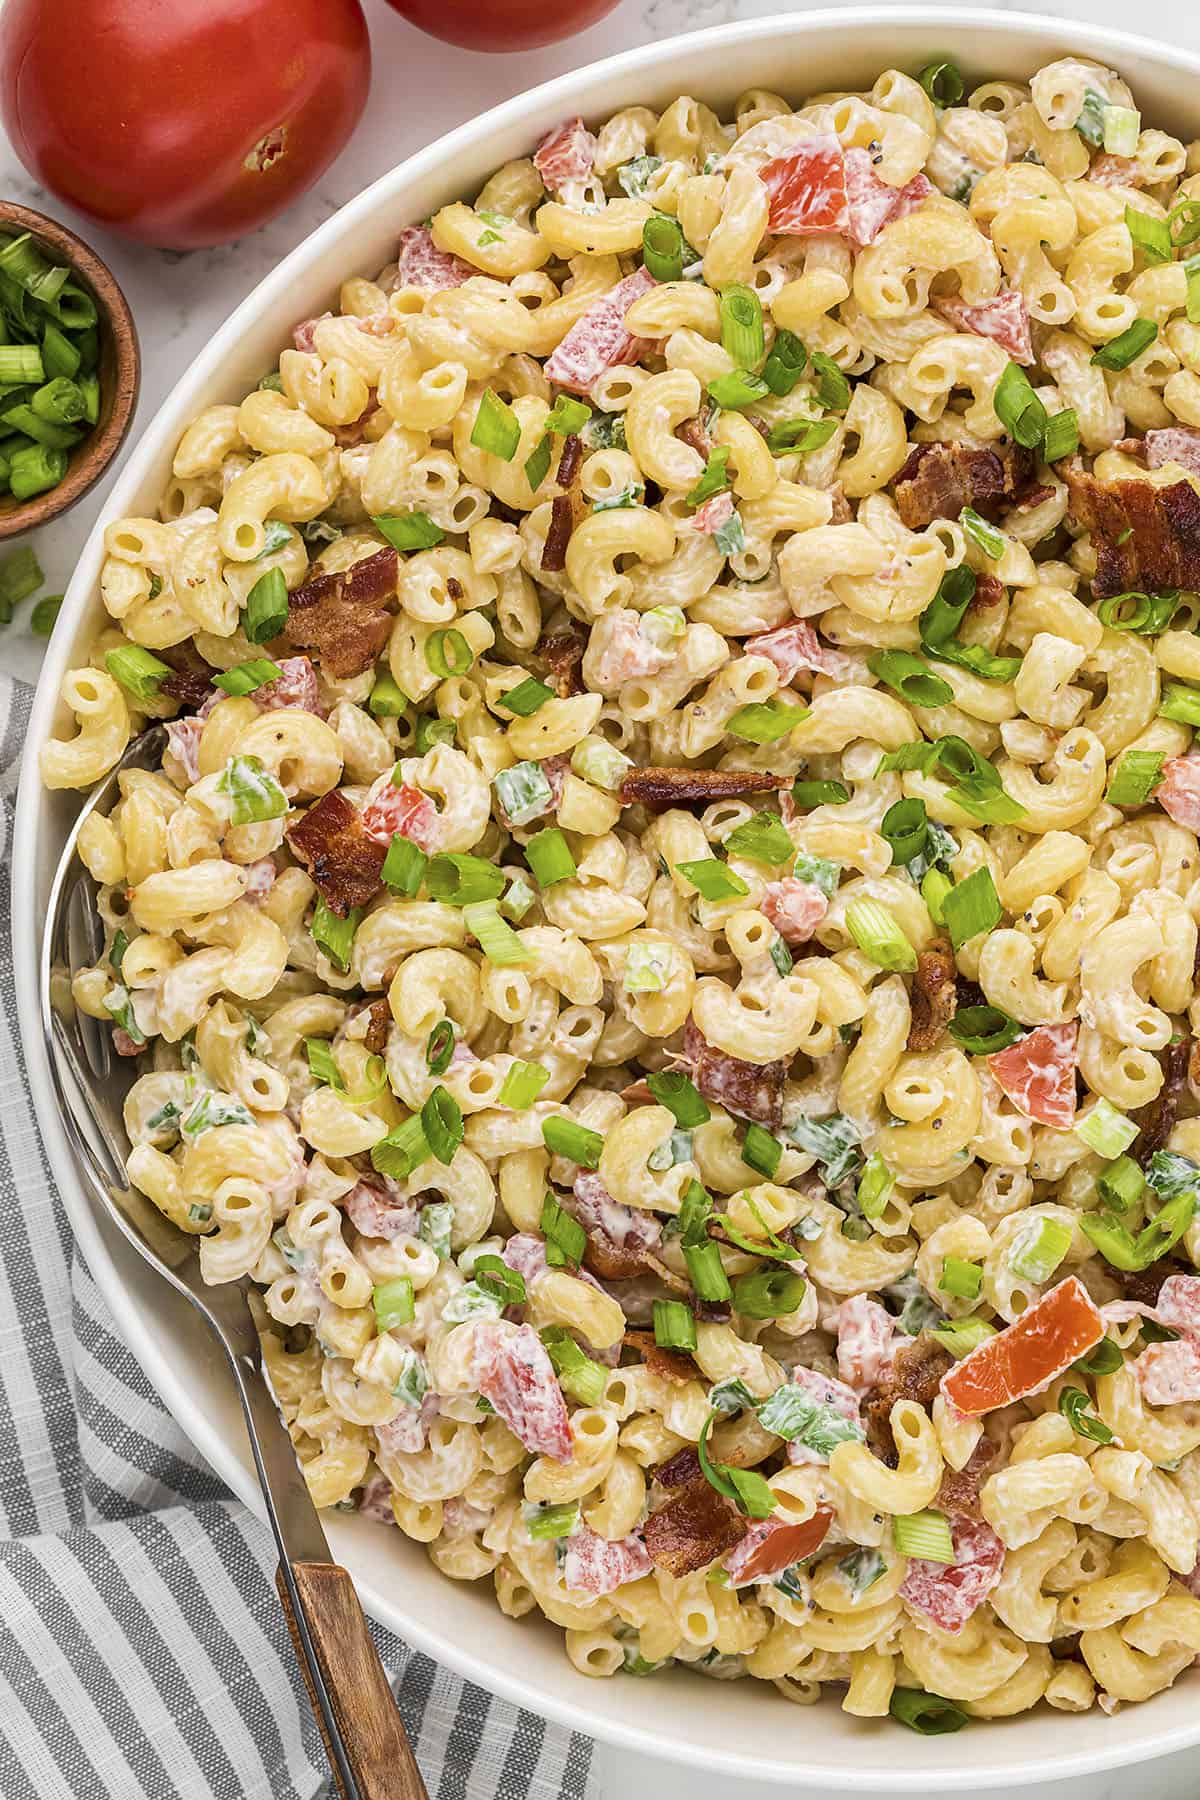 My whole family loves this BLT pasta salad recipe. It's packed with bacon, tomatoes, and green onions.